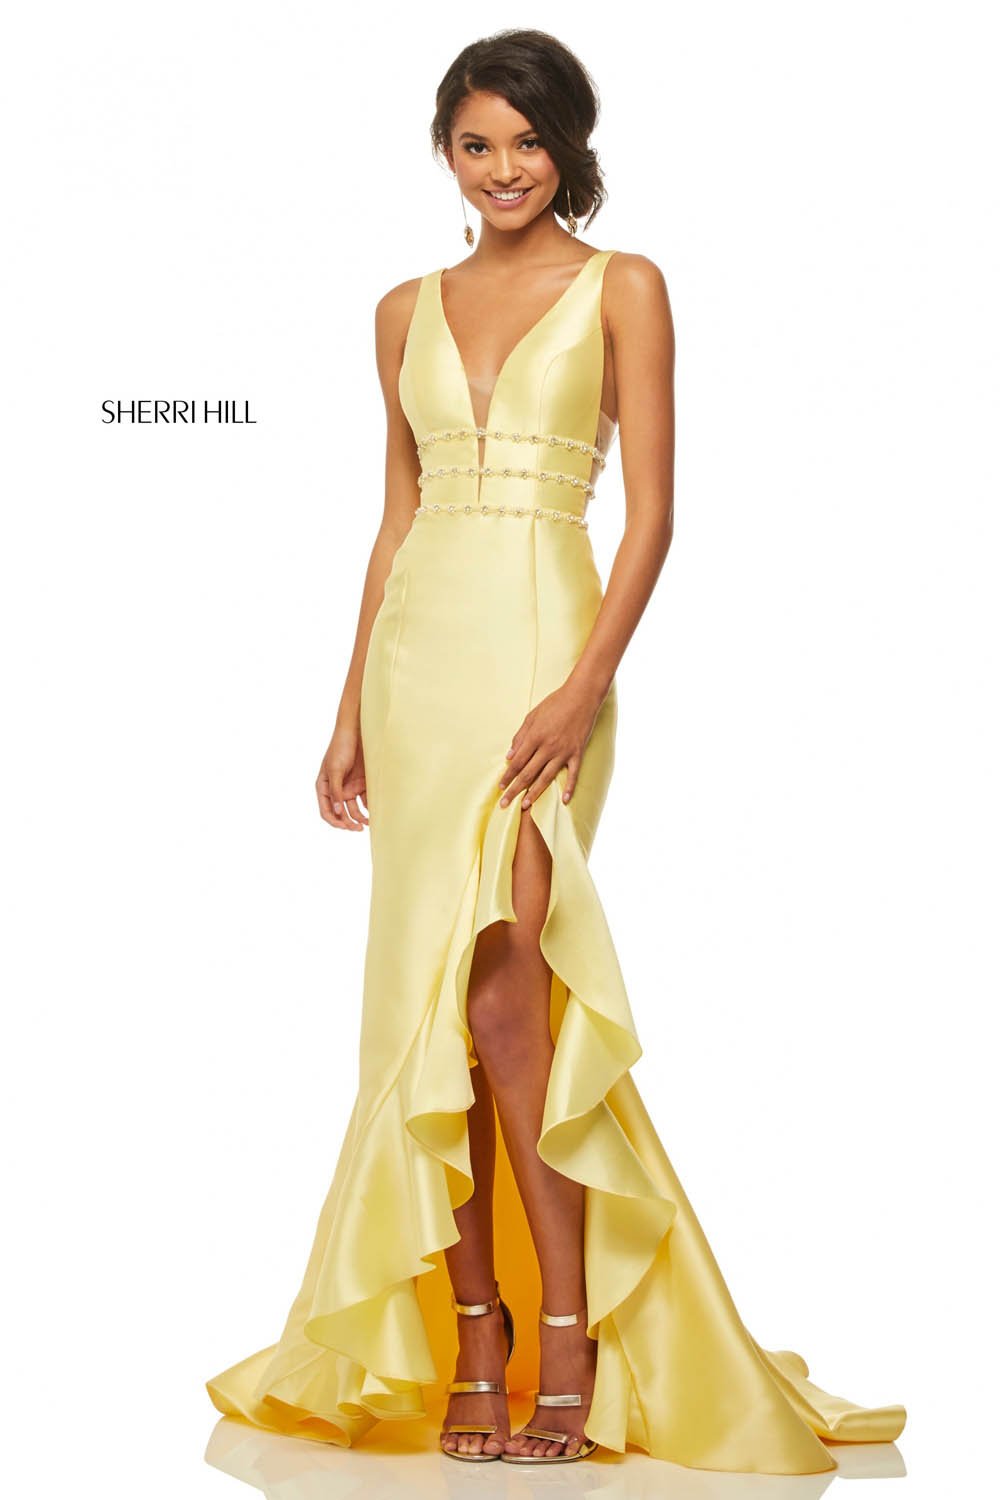 Sherri Hill 52576 dress images in these colors: Yellow, Lilac.